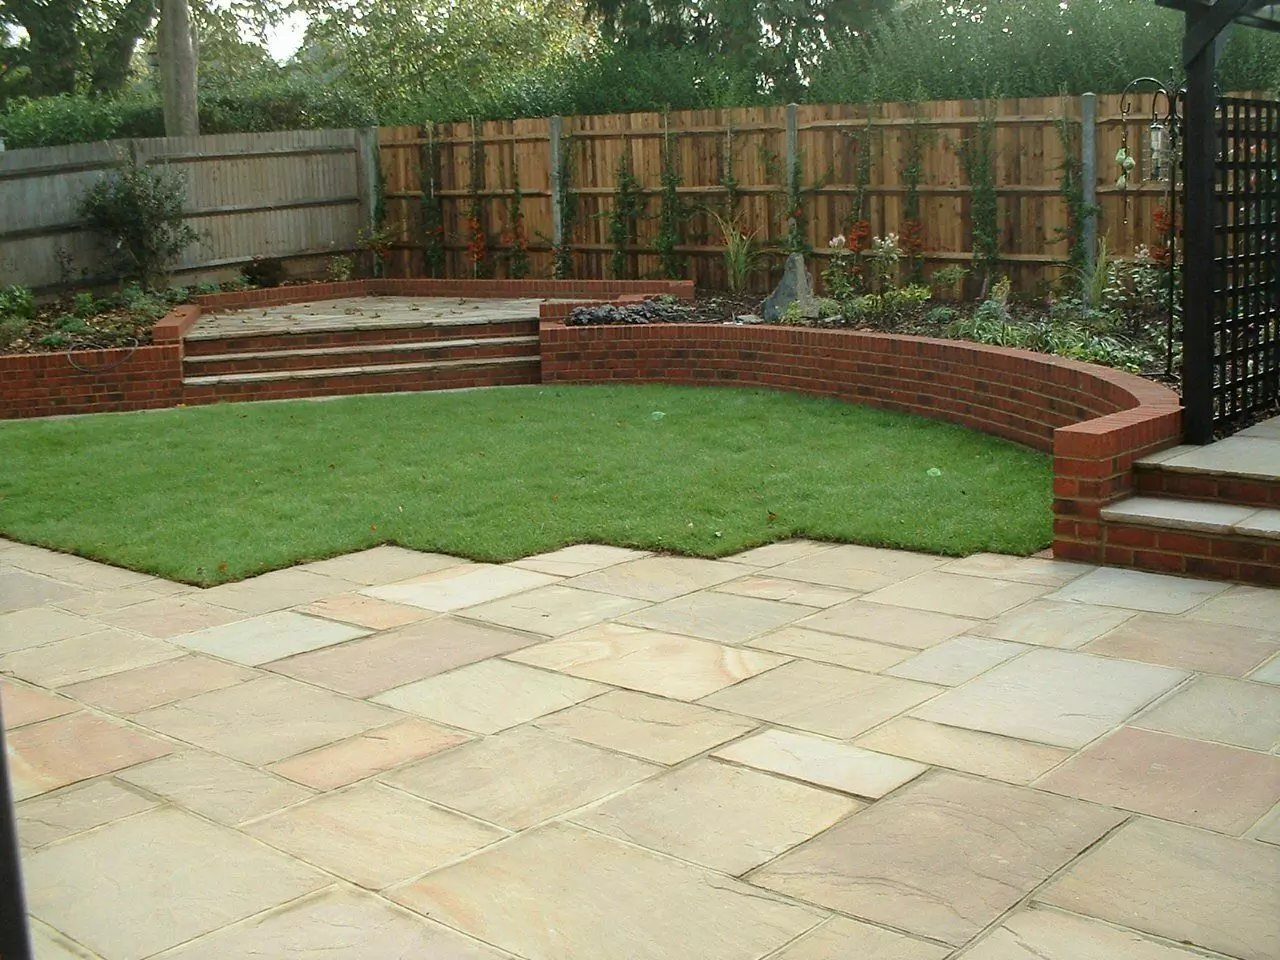 Charing Landscaping Contractors | Garden Landscapers in Charing